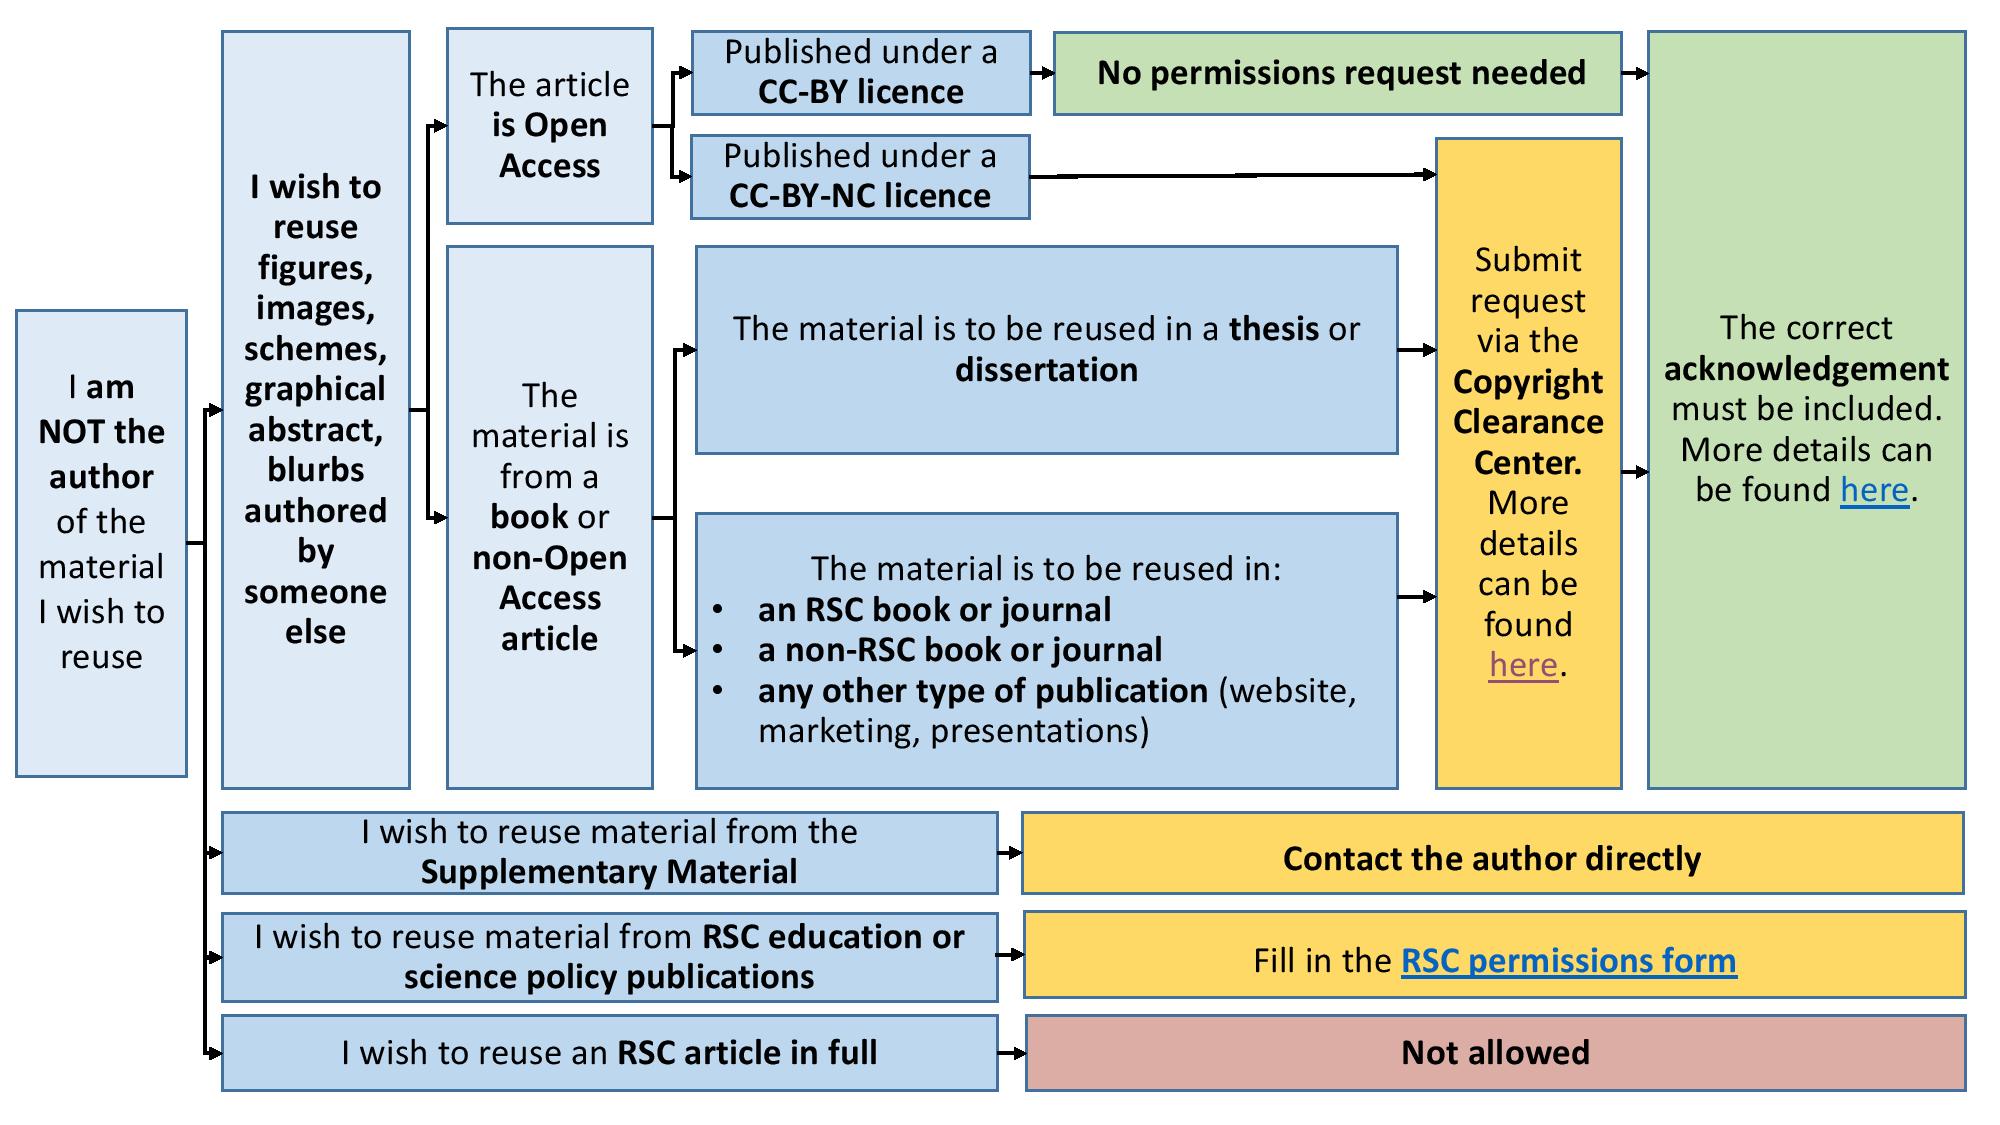 Flowcharts for permissions - I am NOT the author v5-page.jpg